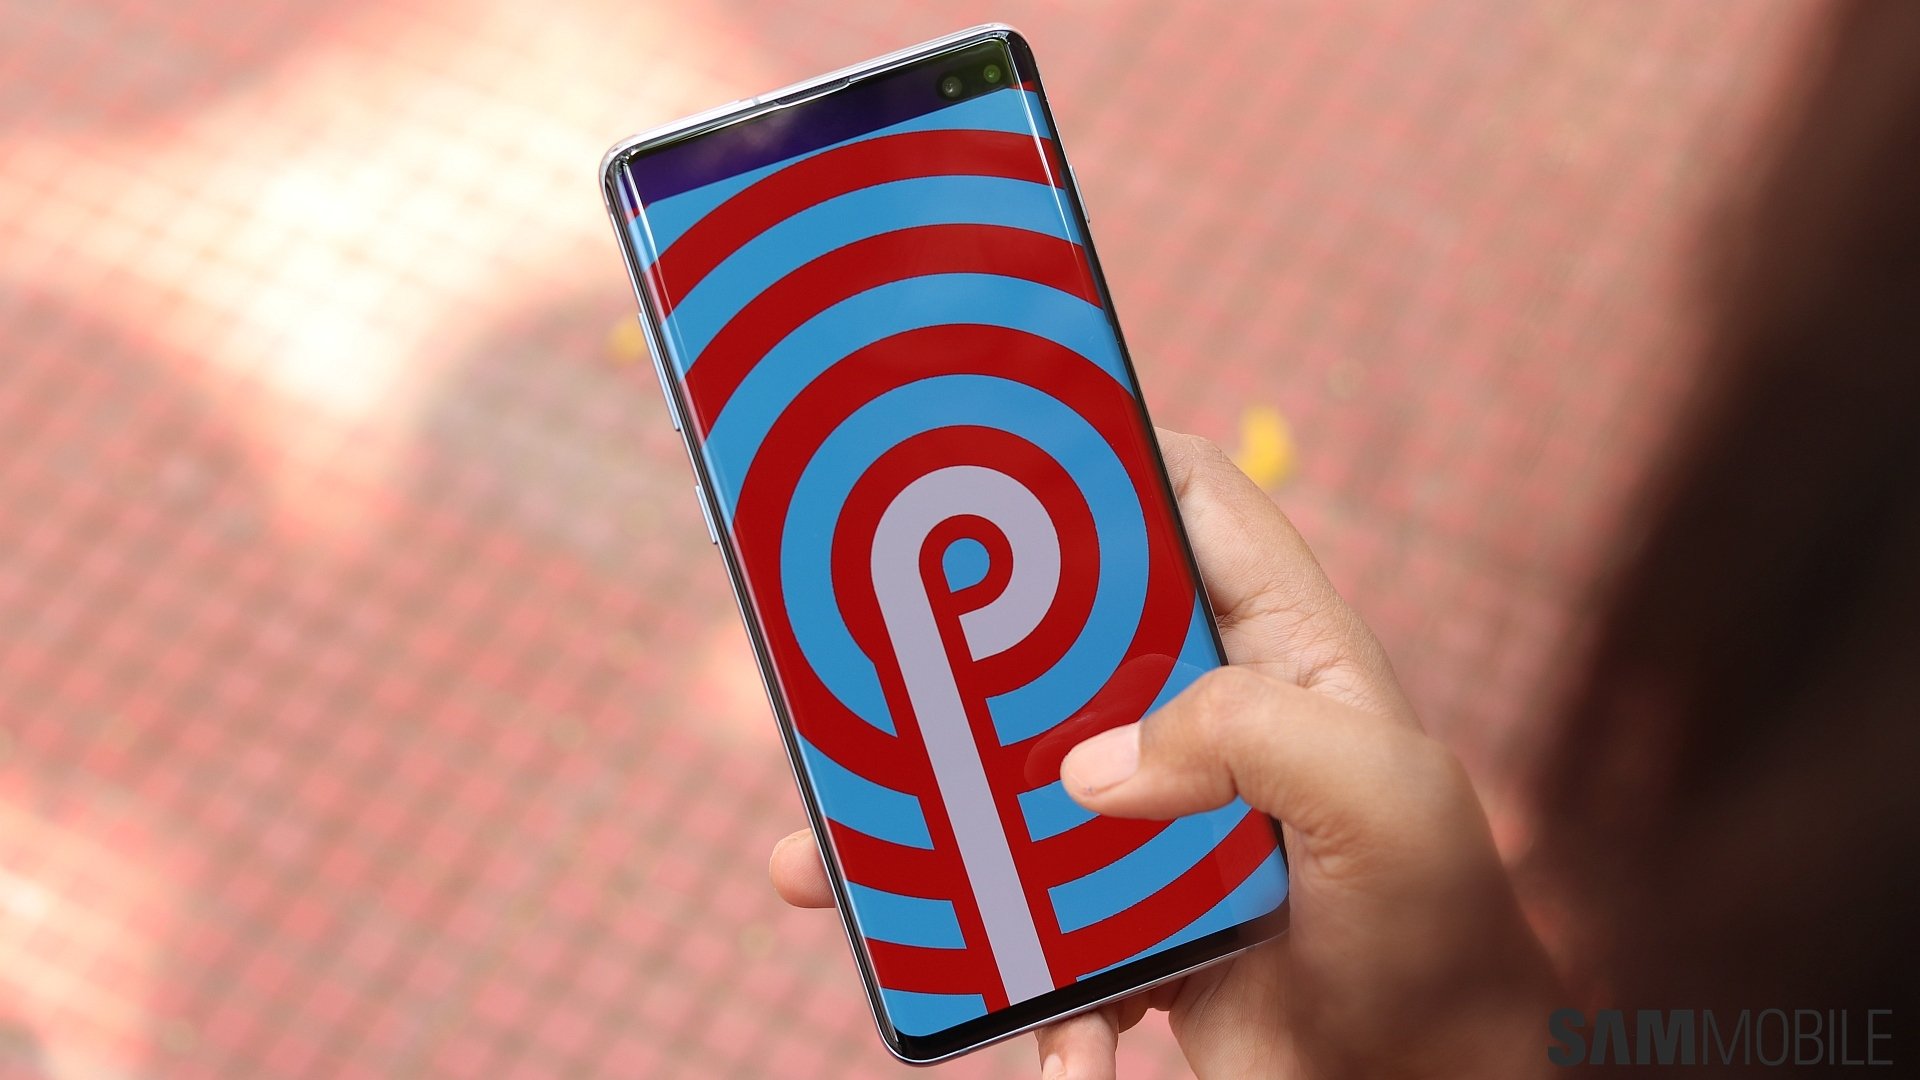 Samsung Galaxy S10 Plus review: Almost a masterpiece! - SamMobile